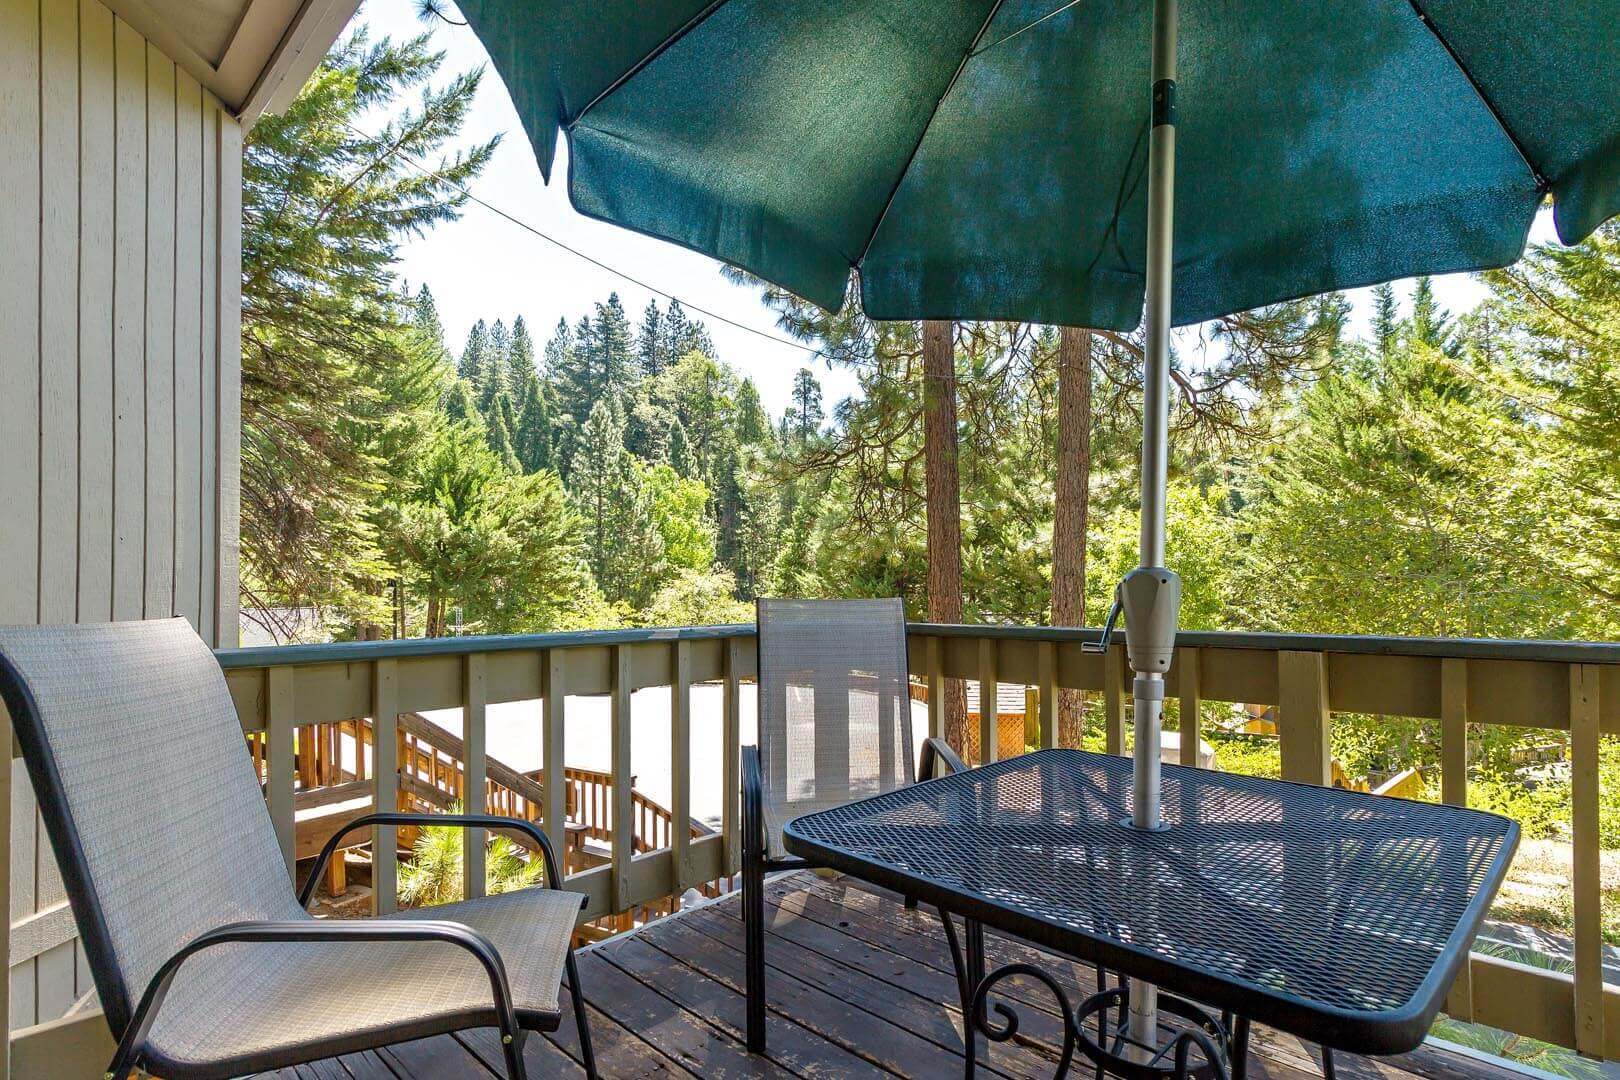 A two bedroom loft view at VRI's Mountain Retreat Resort in California.